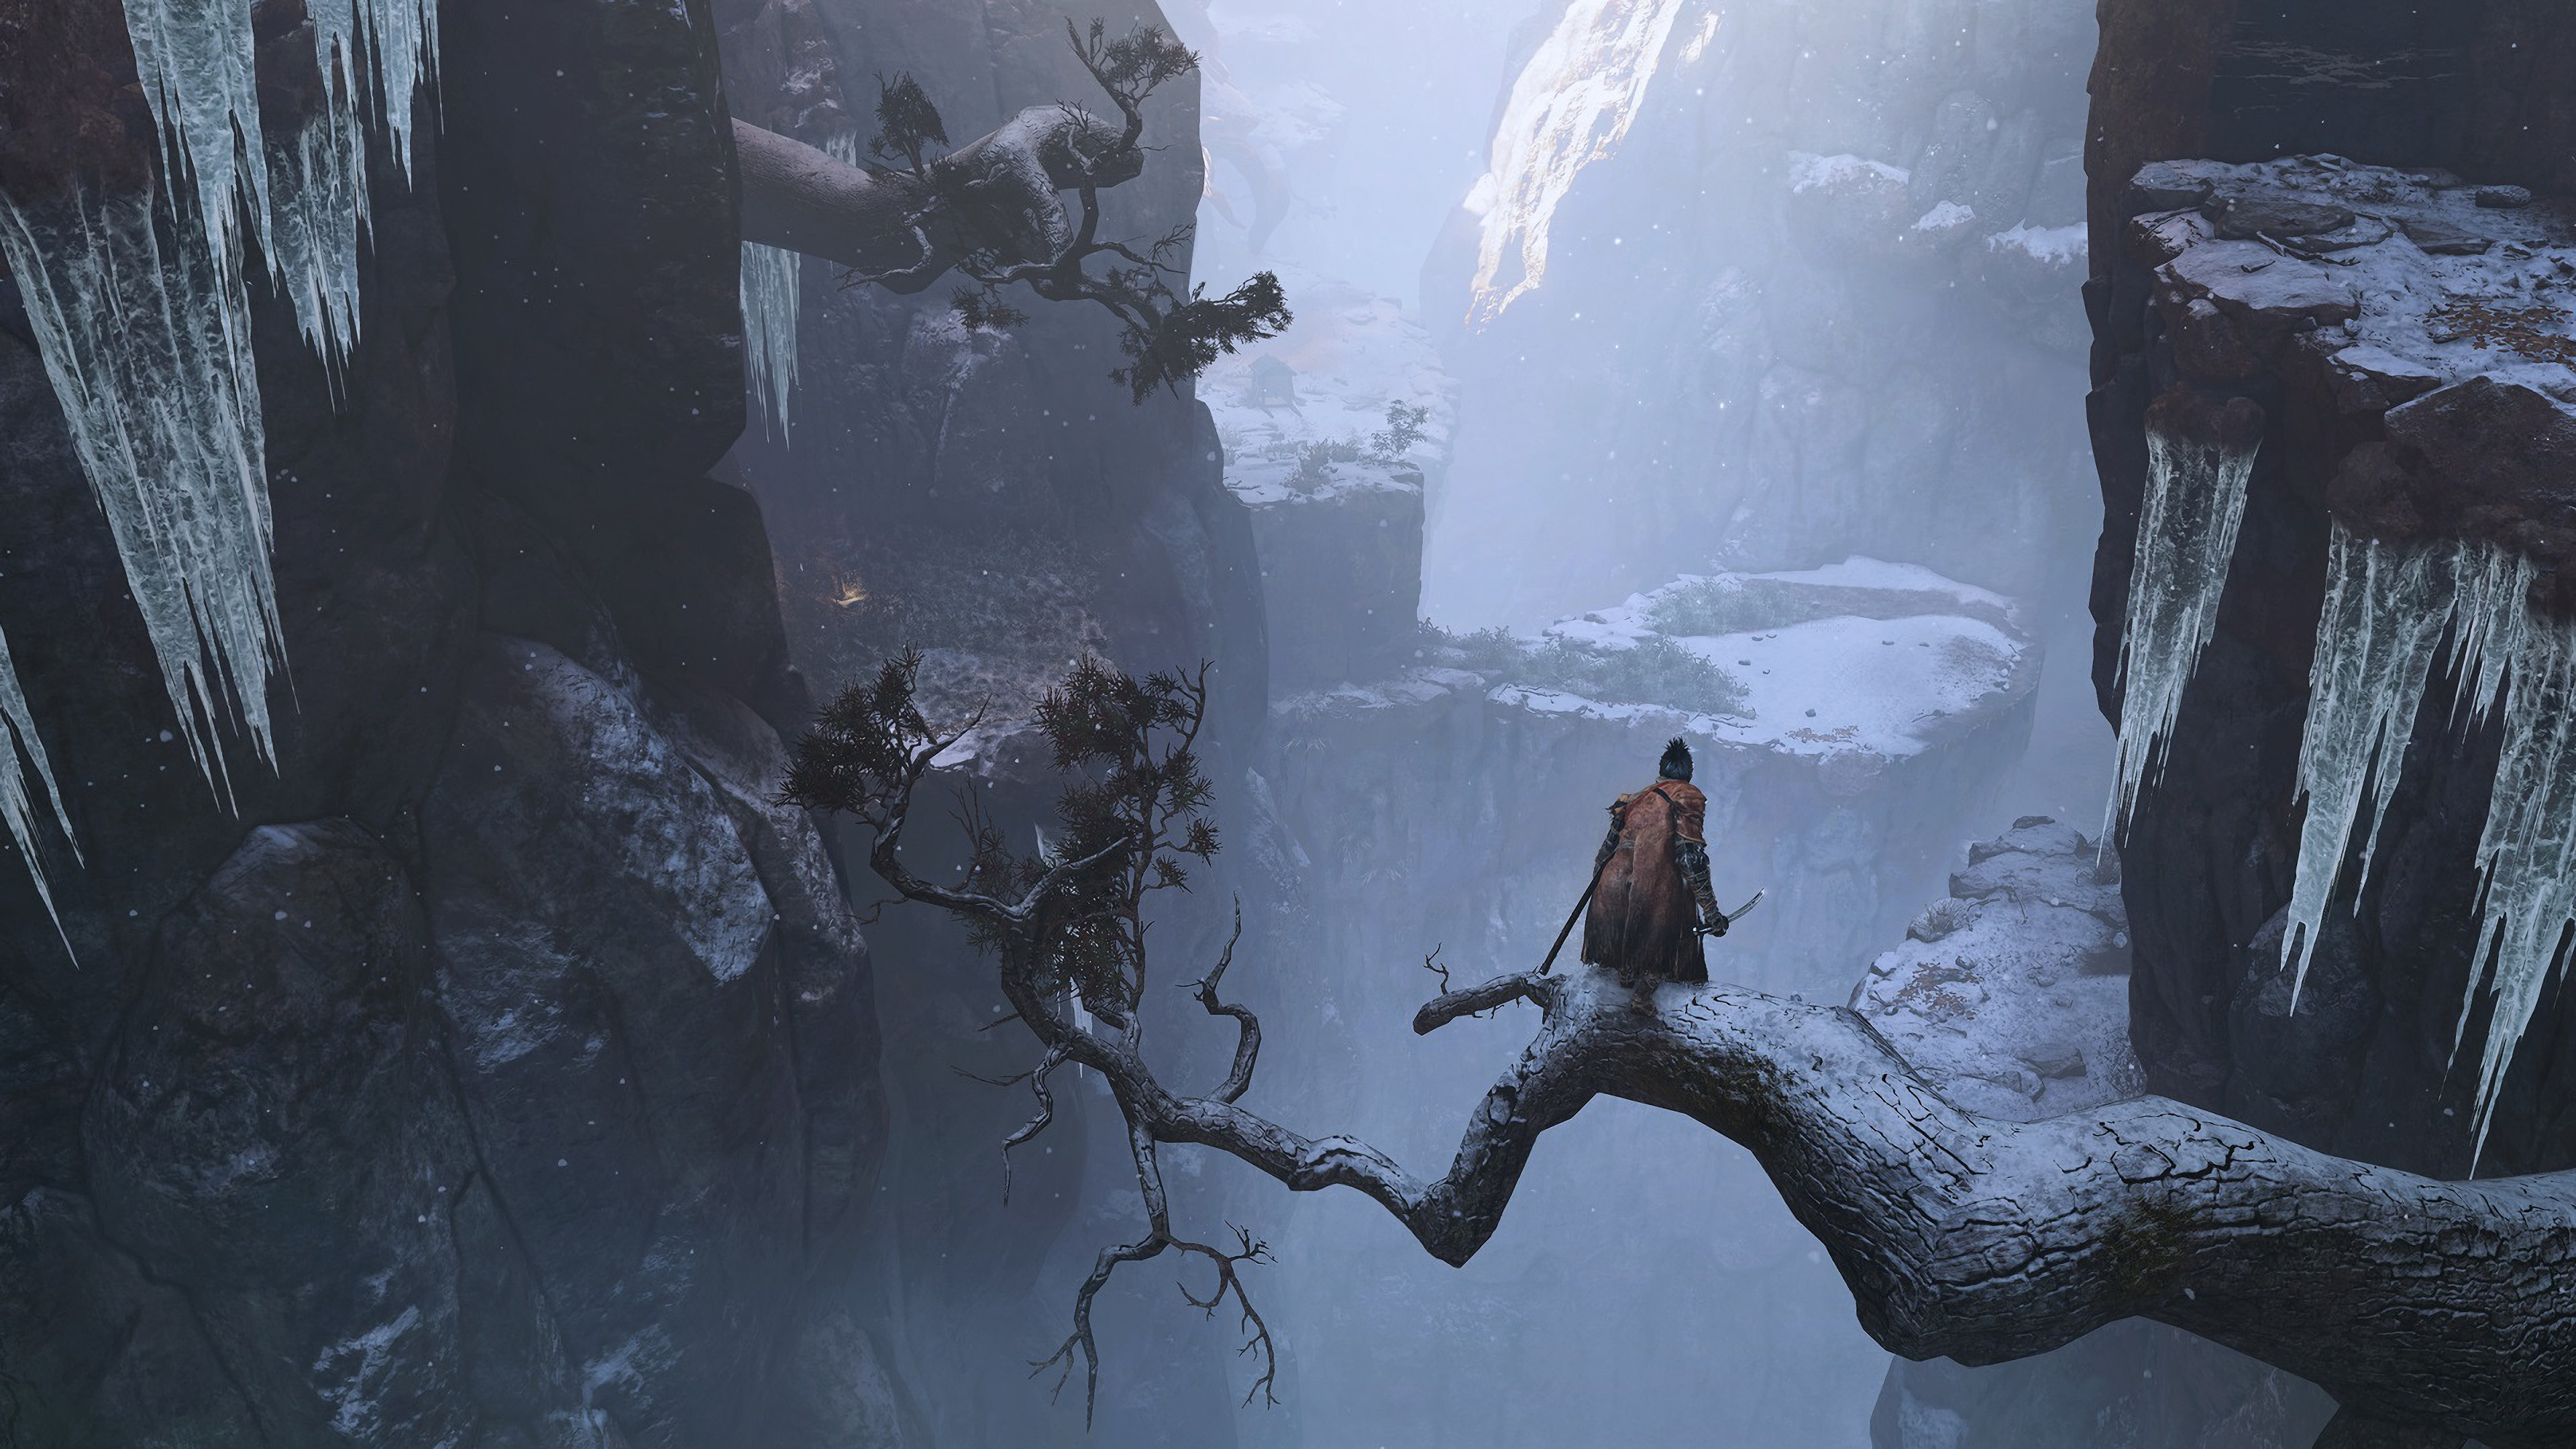 Top 11 Sekiro Shadows Die Twice Wallpapers in 4K and Full HD